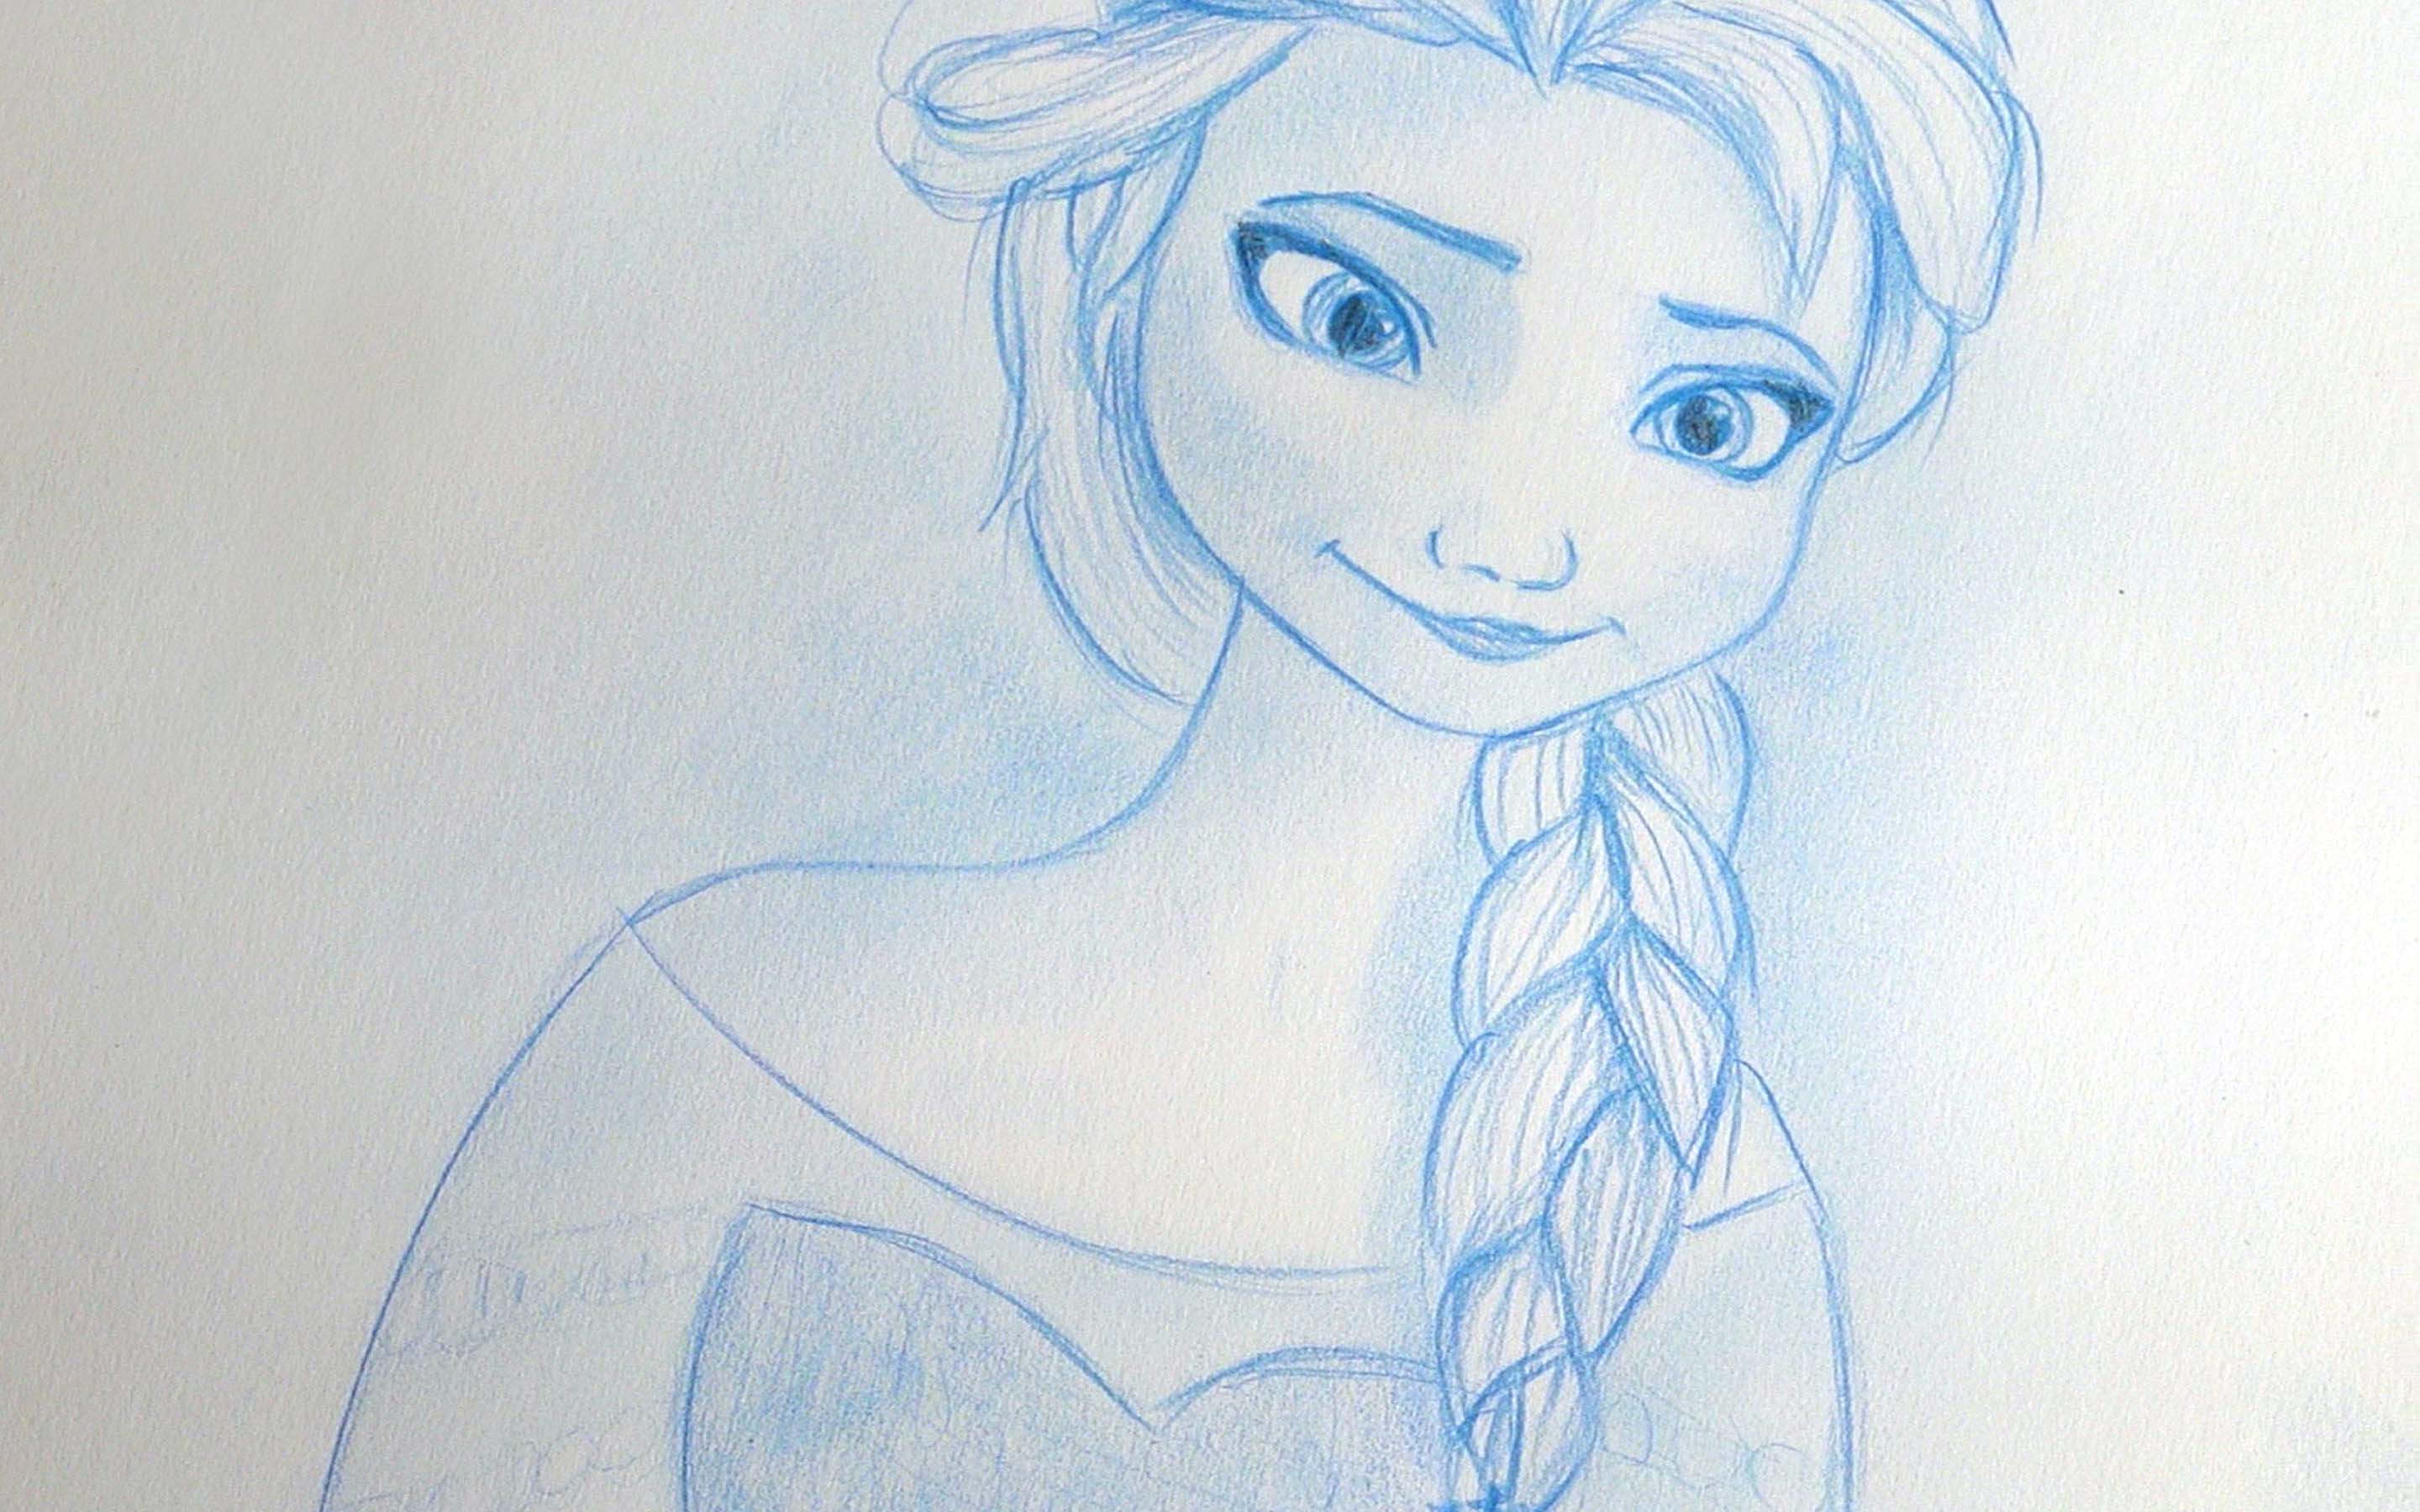 Disney Frozen Elsa Pencil Etsy Drawing Close Up by TheCreativeChameleon